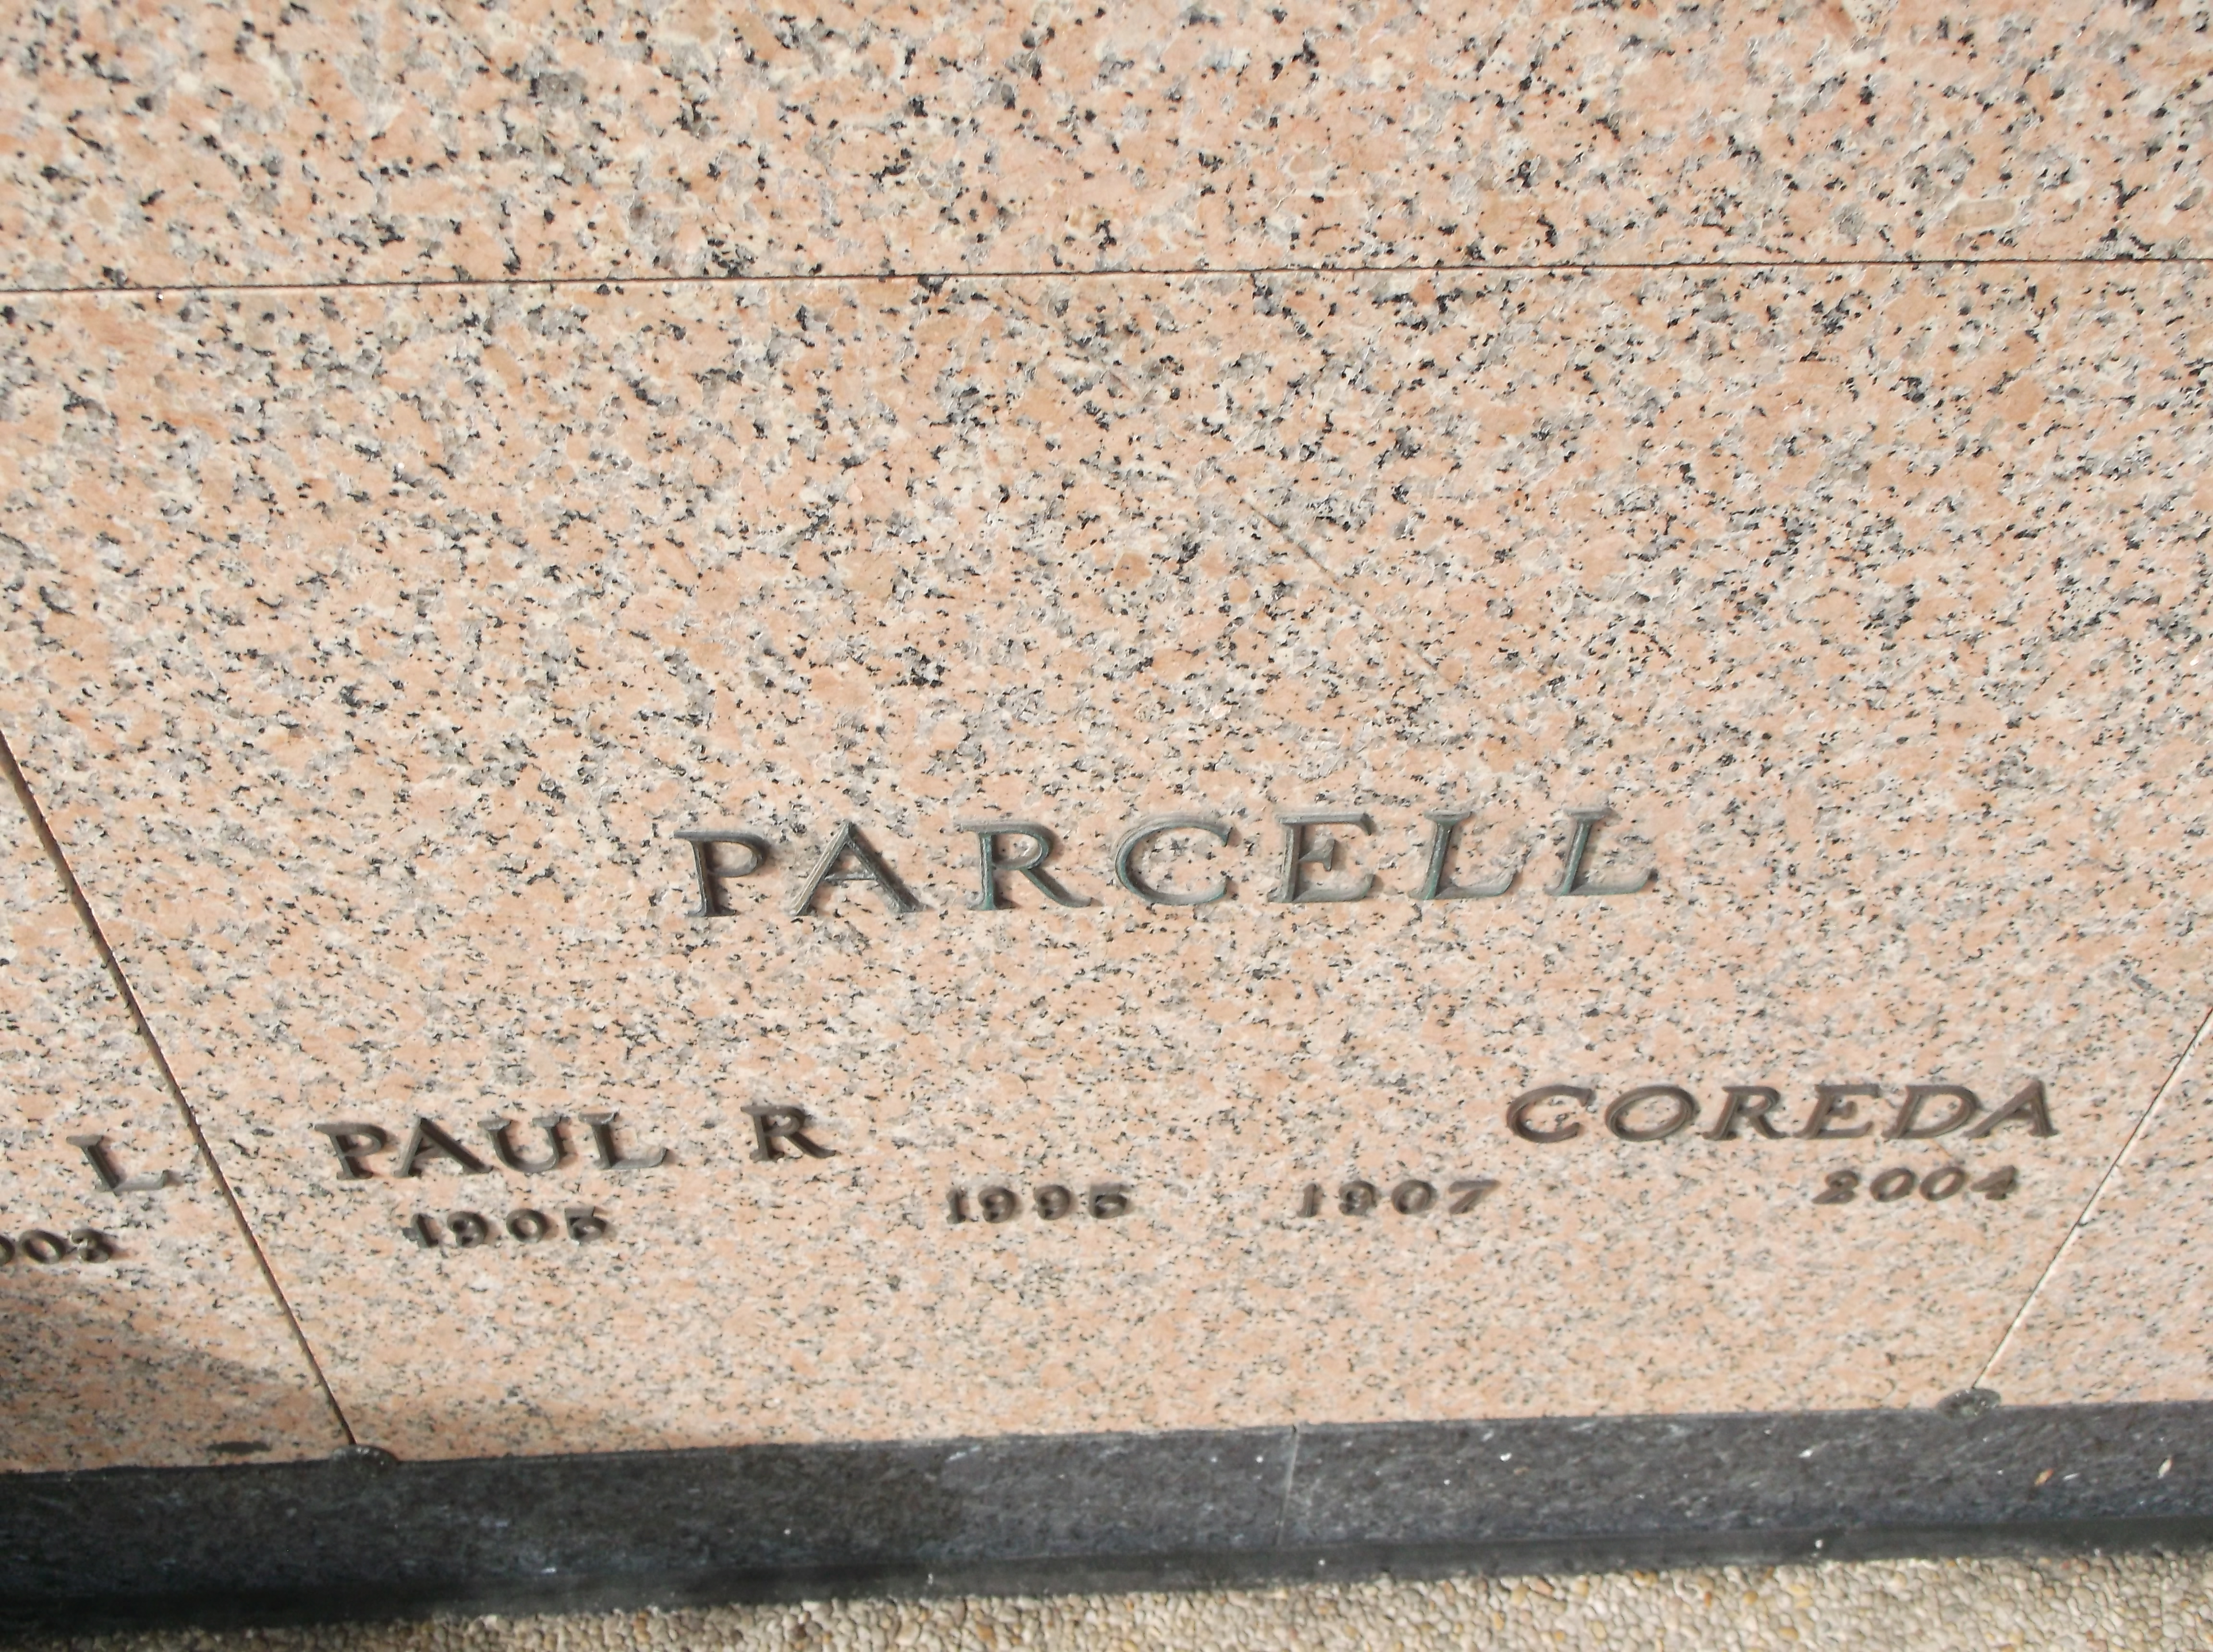 Paul R Parcell